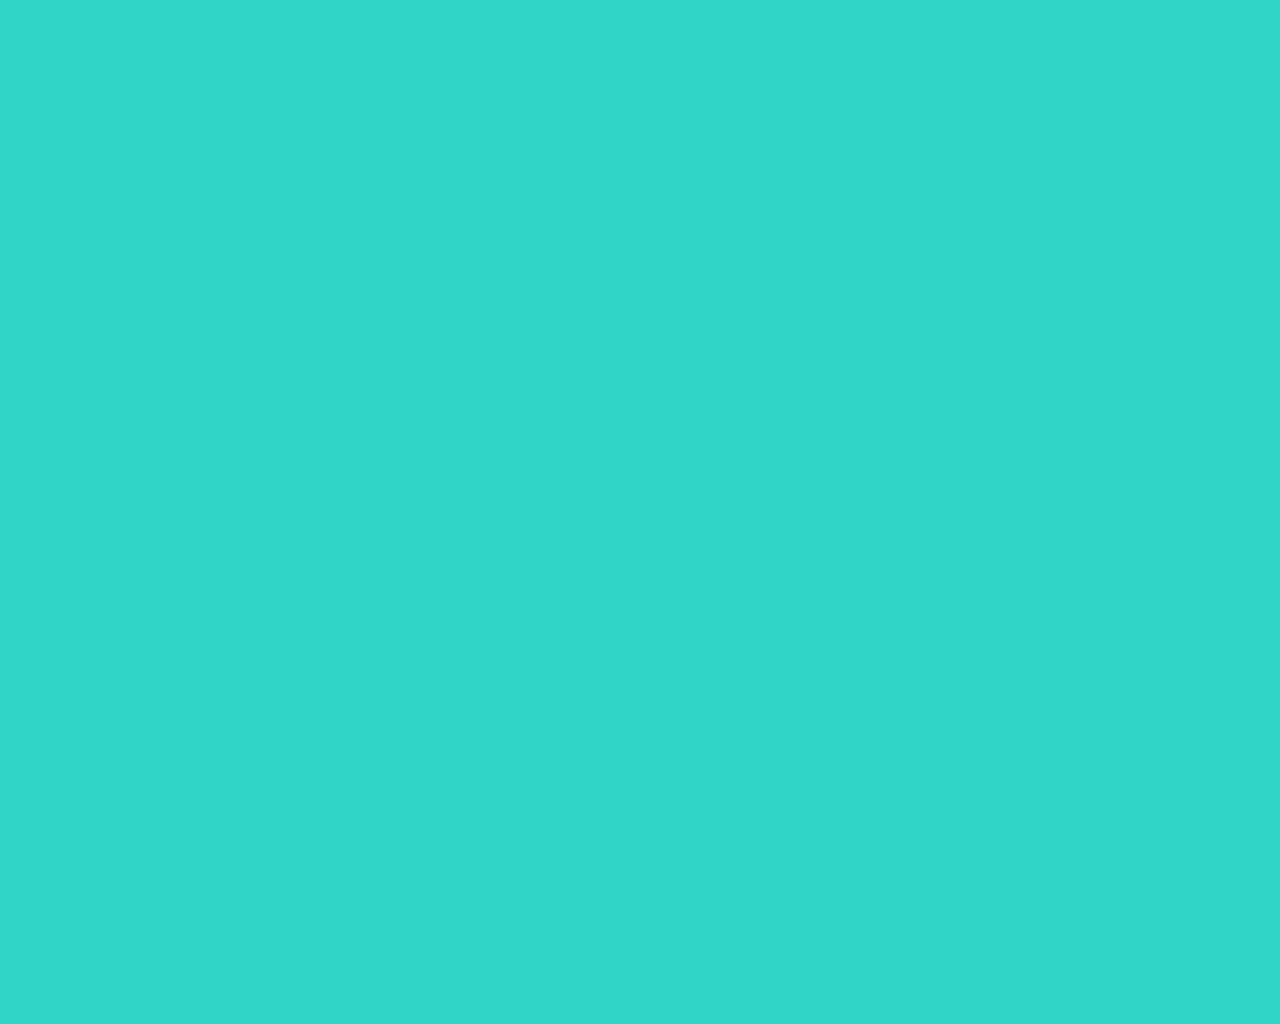 Turquoise Background Wallpaper